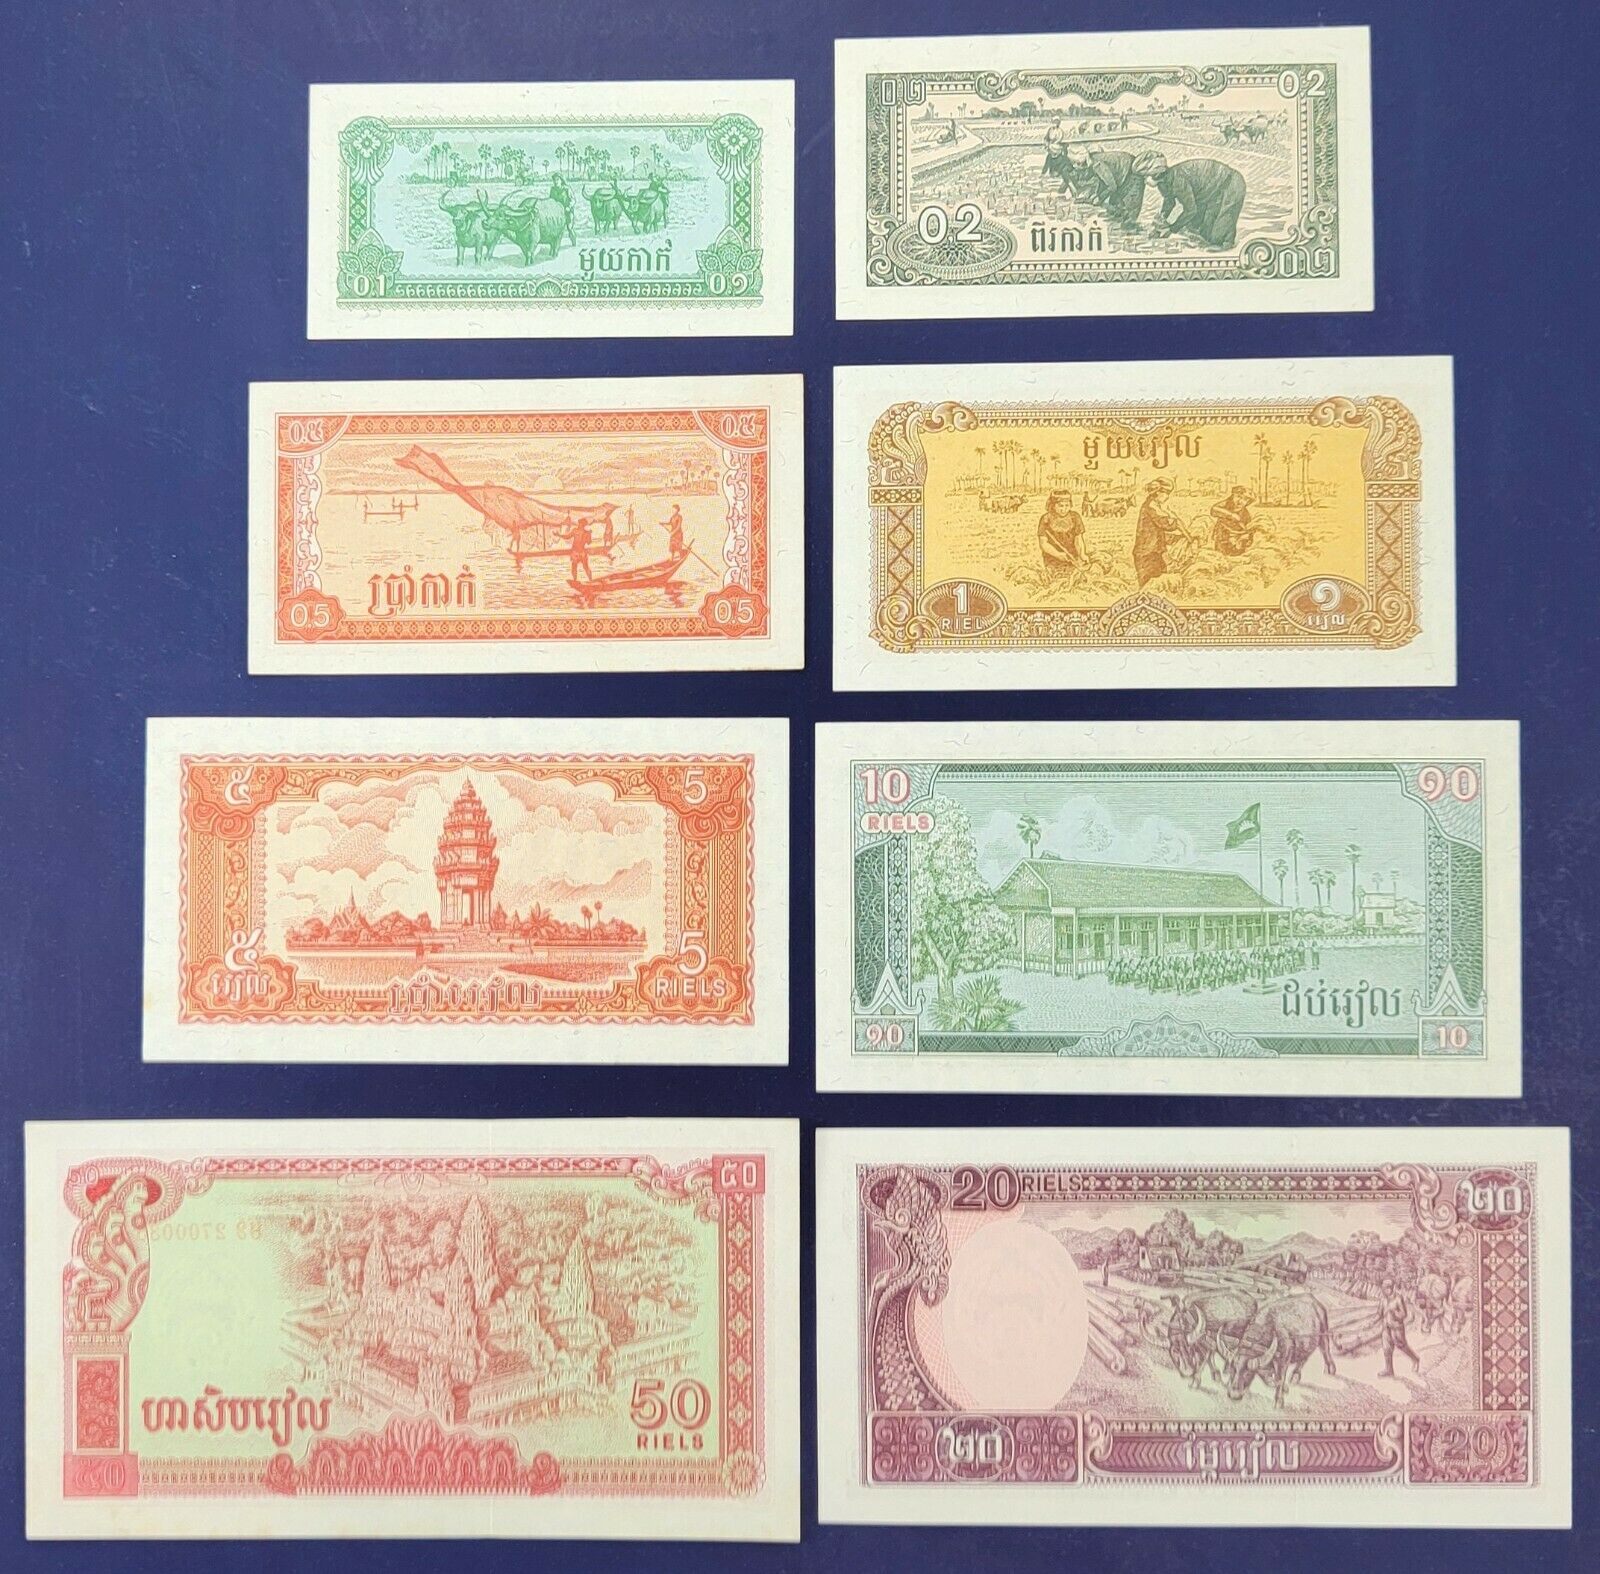 Cambodia Democratic Kampuchea 1979 Currency Note, P 25-32, Banknote Set Unc